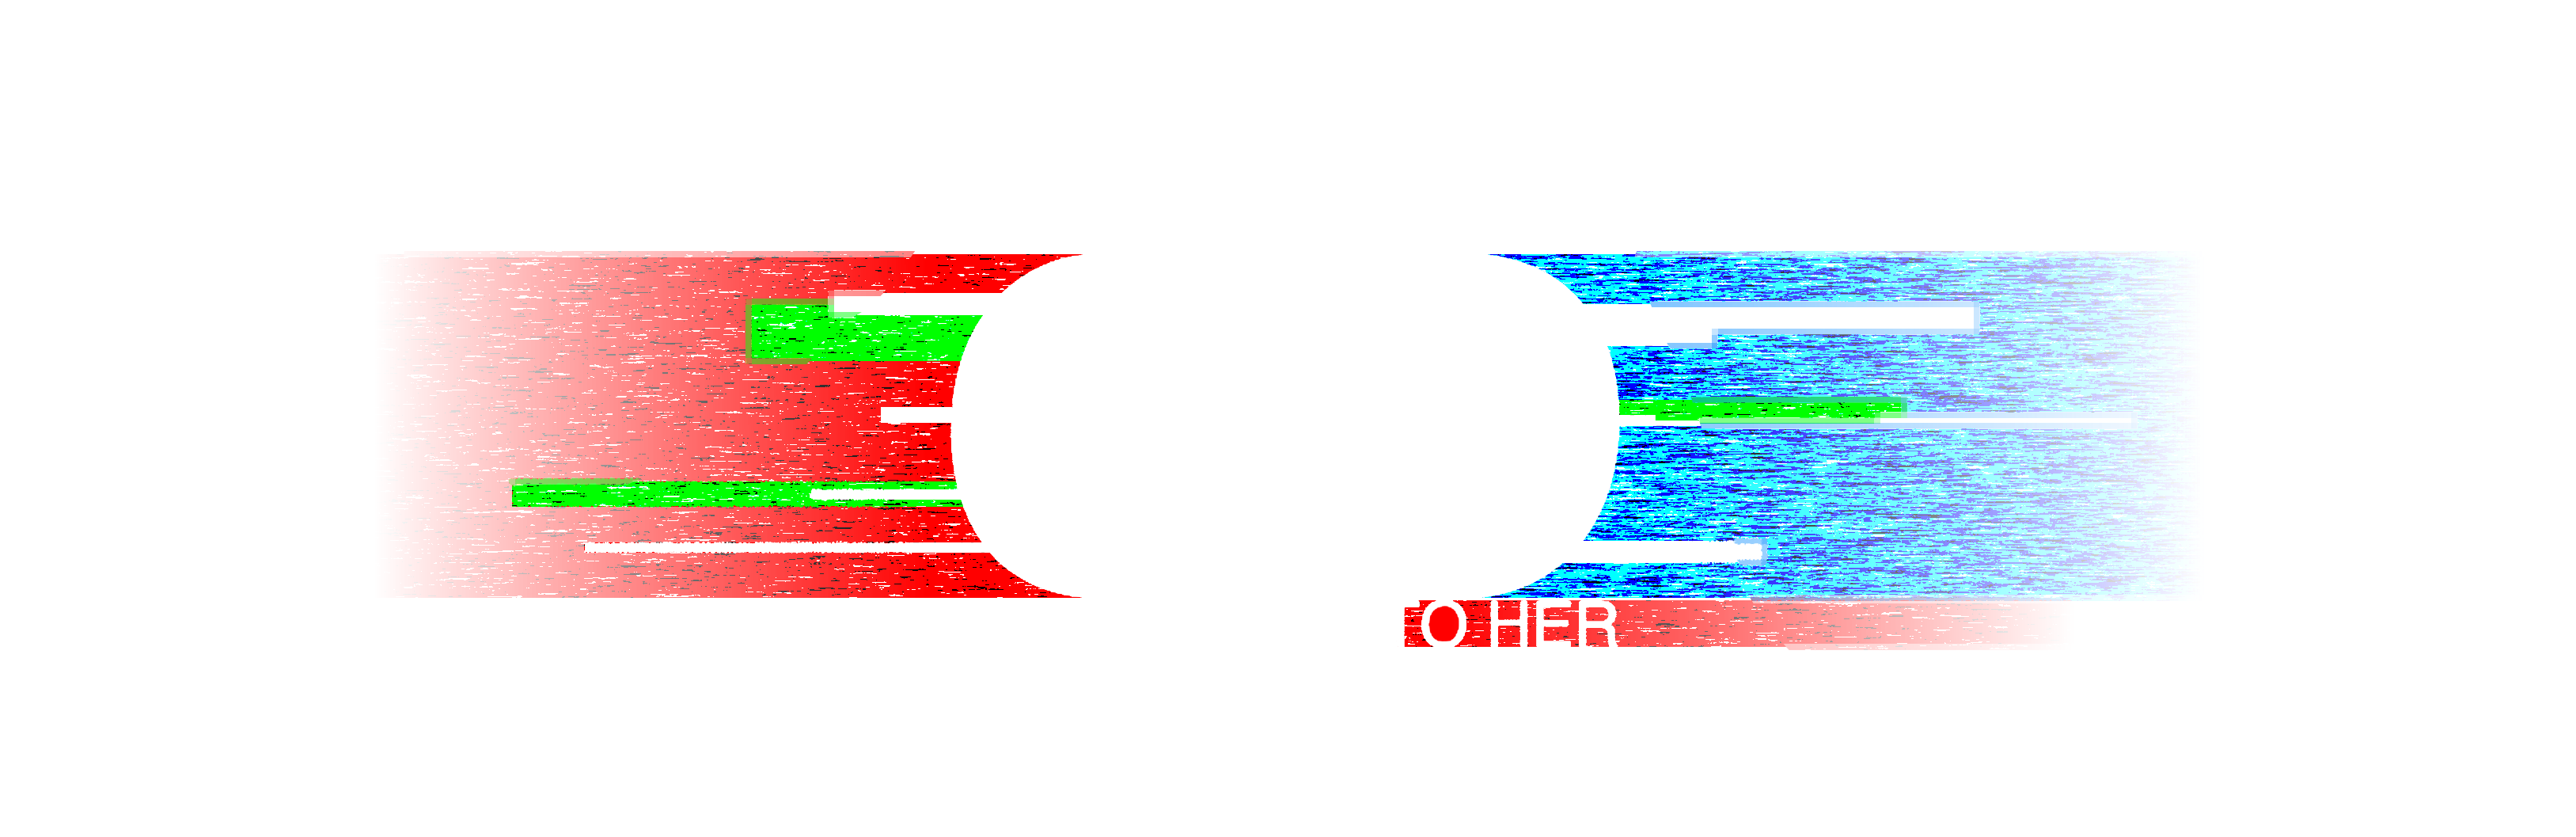 GO TO HER